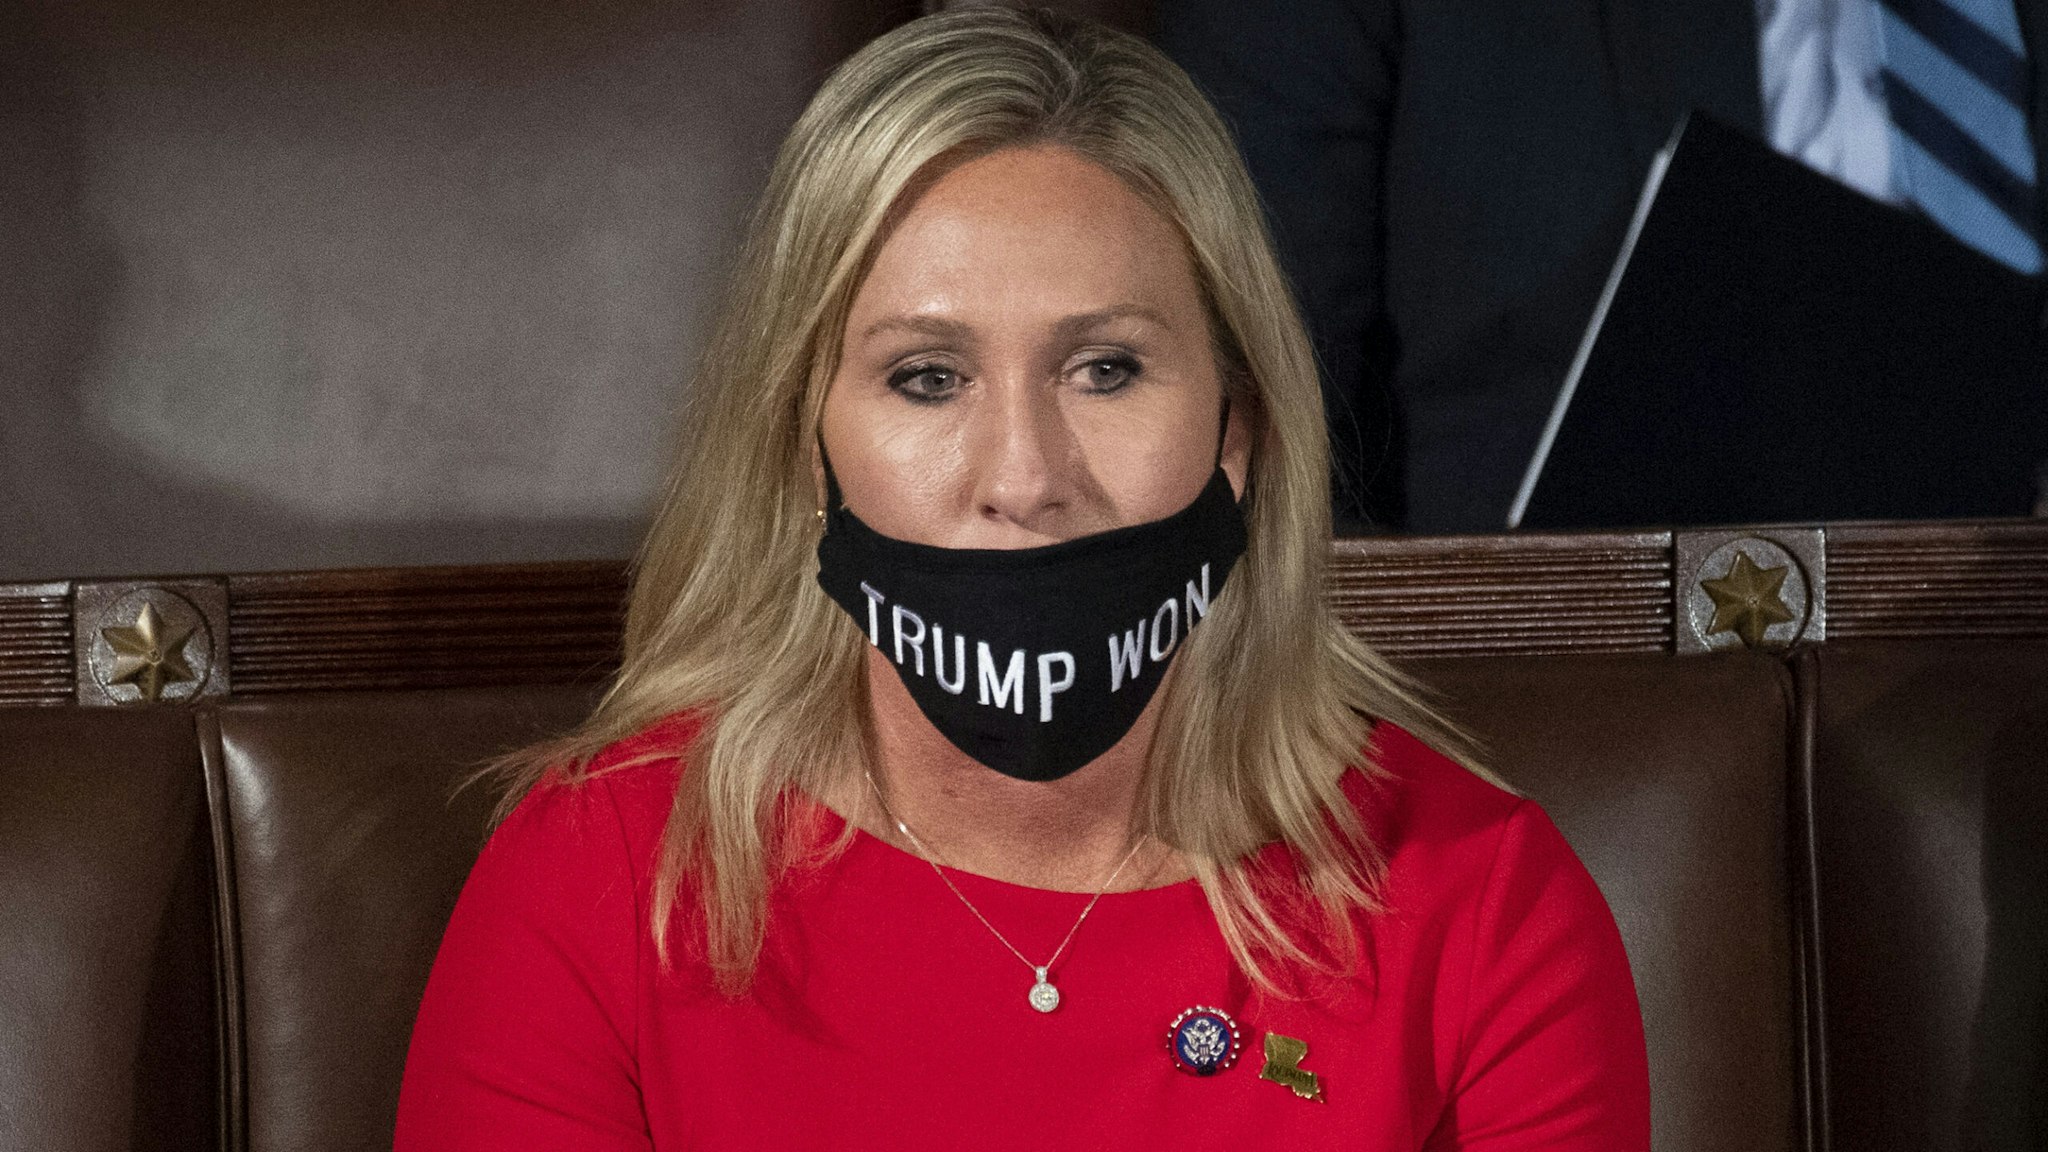 UNITED STATES - January 3: Rep.-elect Marjorie Taylor Greene, R-Ga., wears a Trump Won mask during the first session of the 117th Congress in the House Chamber as members of the 117th Congress are sworn in on Sunday, Jan. 3, 2021